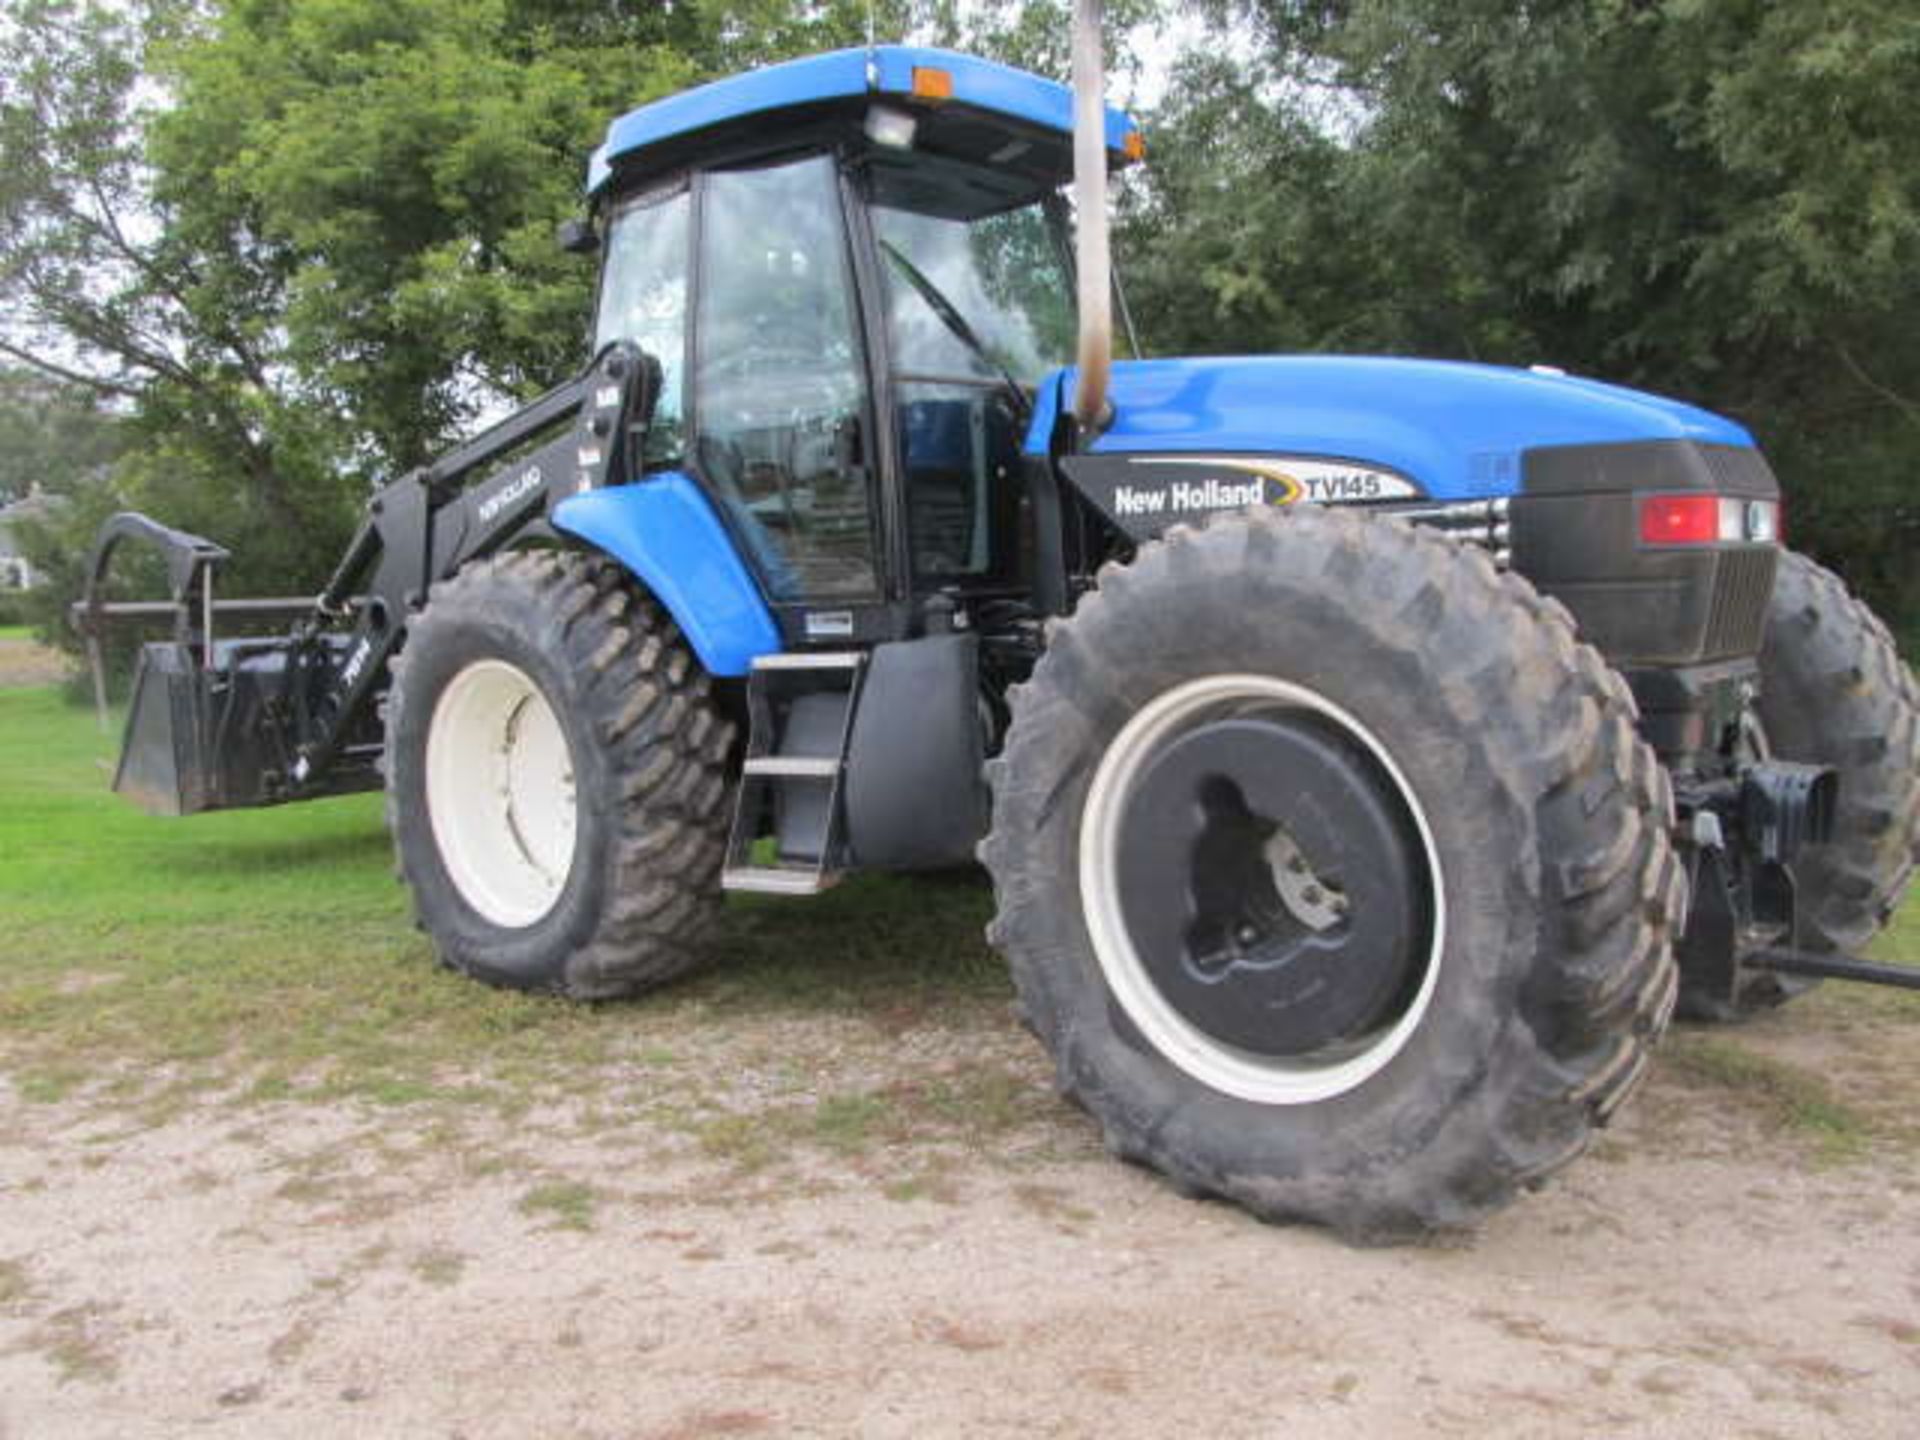 2004 NEW HOLLAND TV 145 BI-DIRECTIONAL TRACTOR; 4065 Hours, New Holland 7614 FEL & Grapple, PTO Both - Image 4 of 6